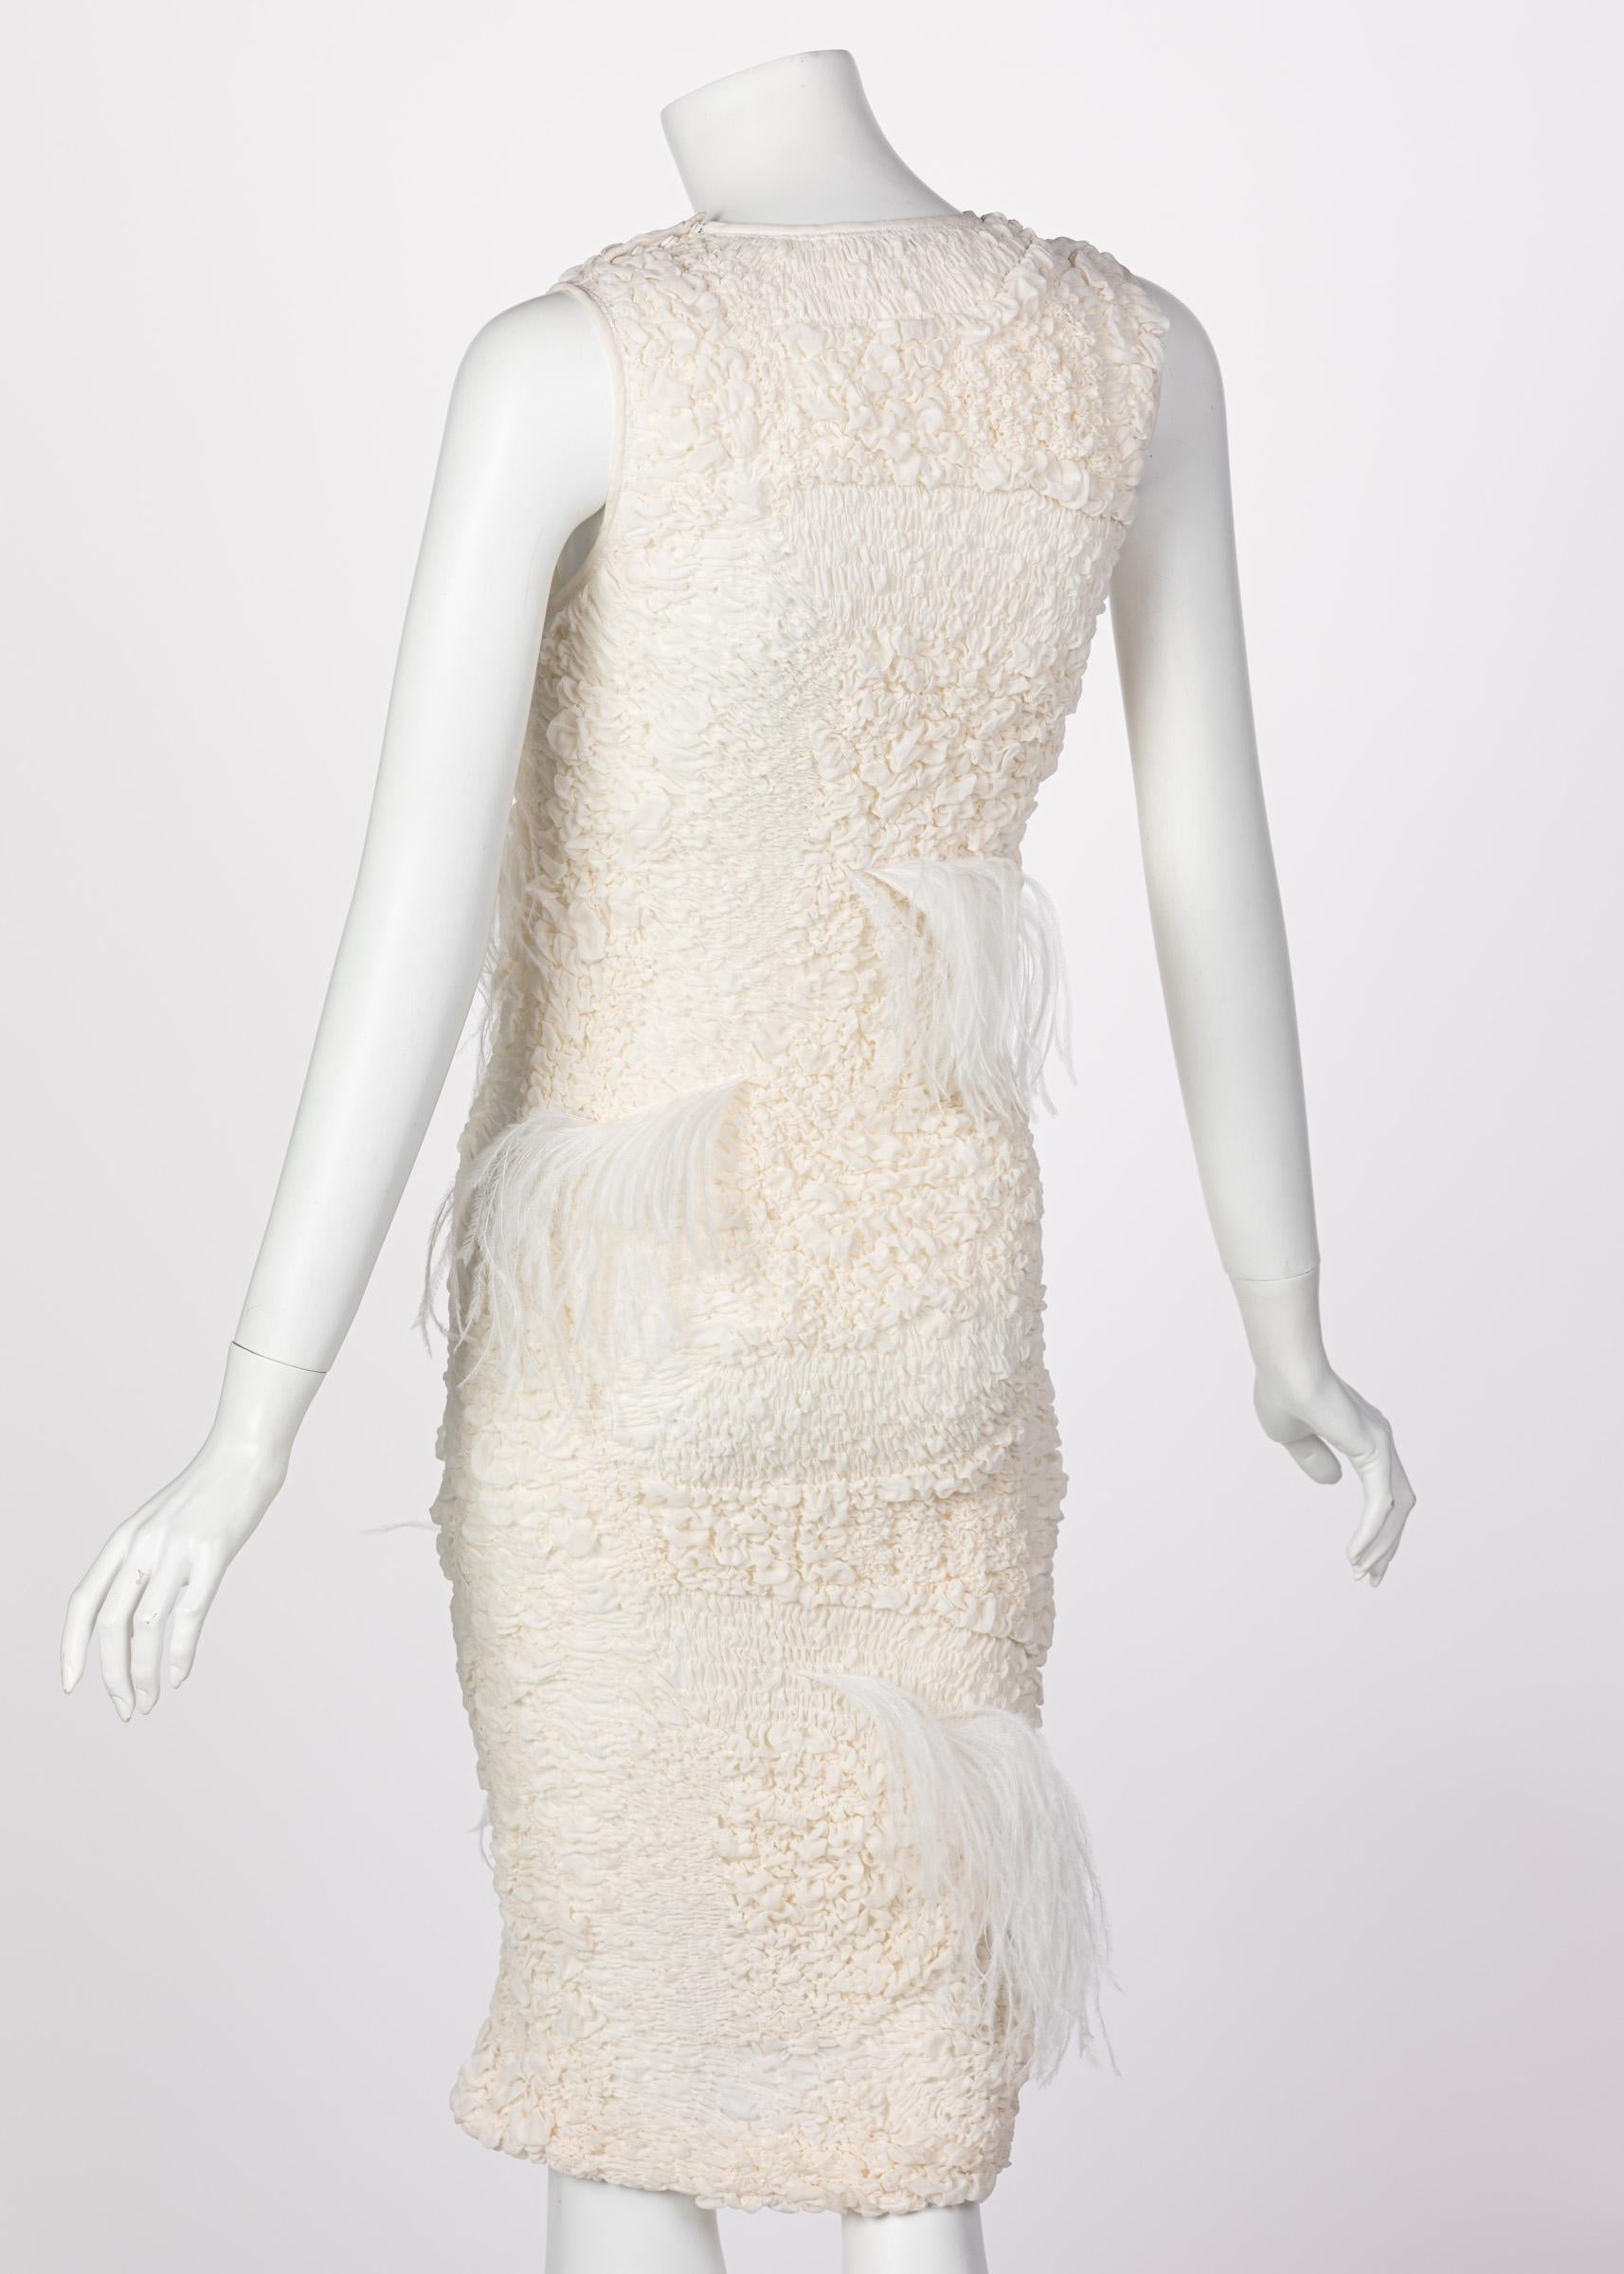 Women's Nina Ricci Ivory Silk Feather Embellished Dress, Spring 2016 For Sale